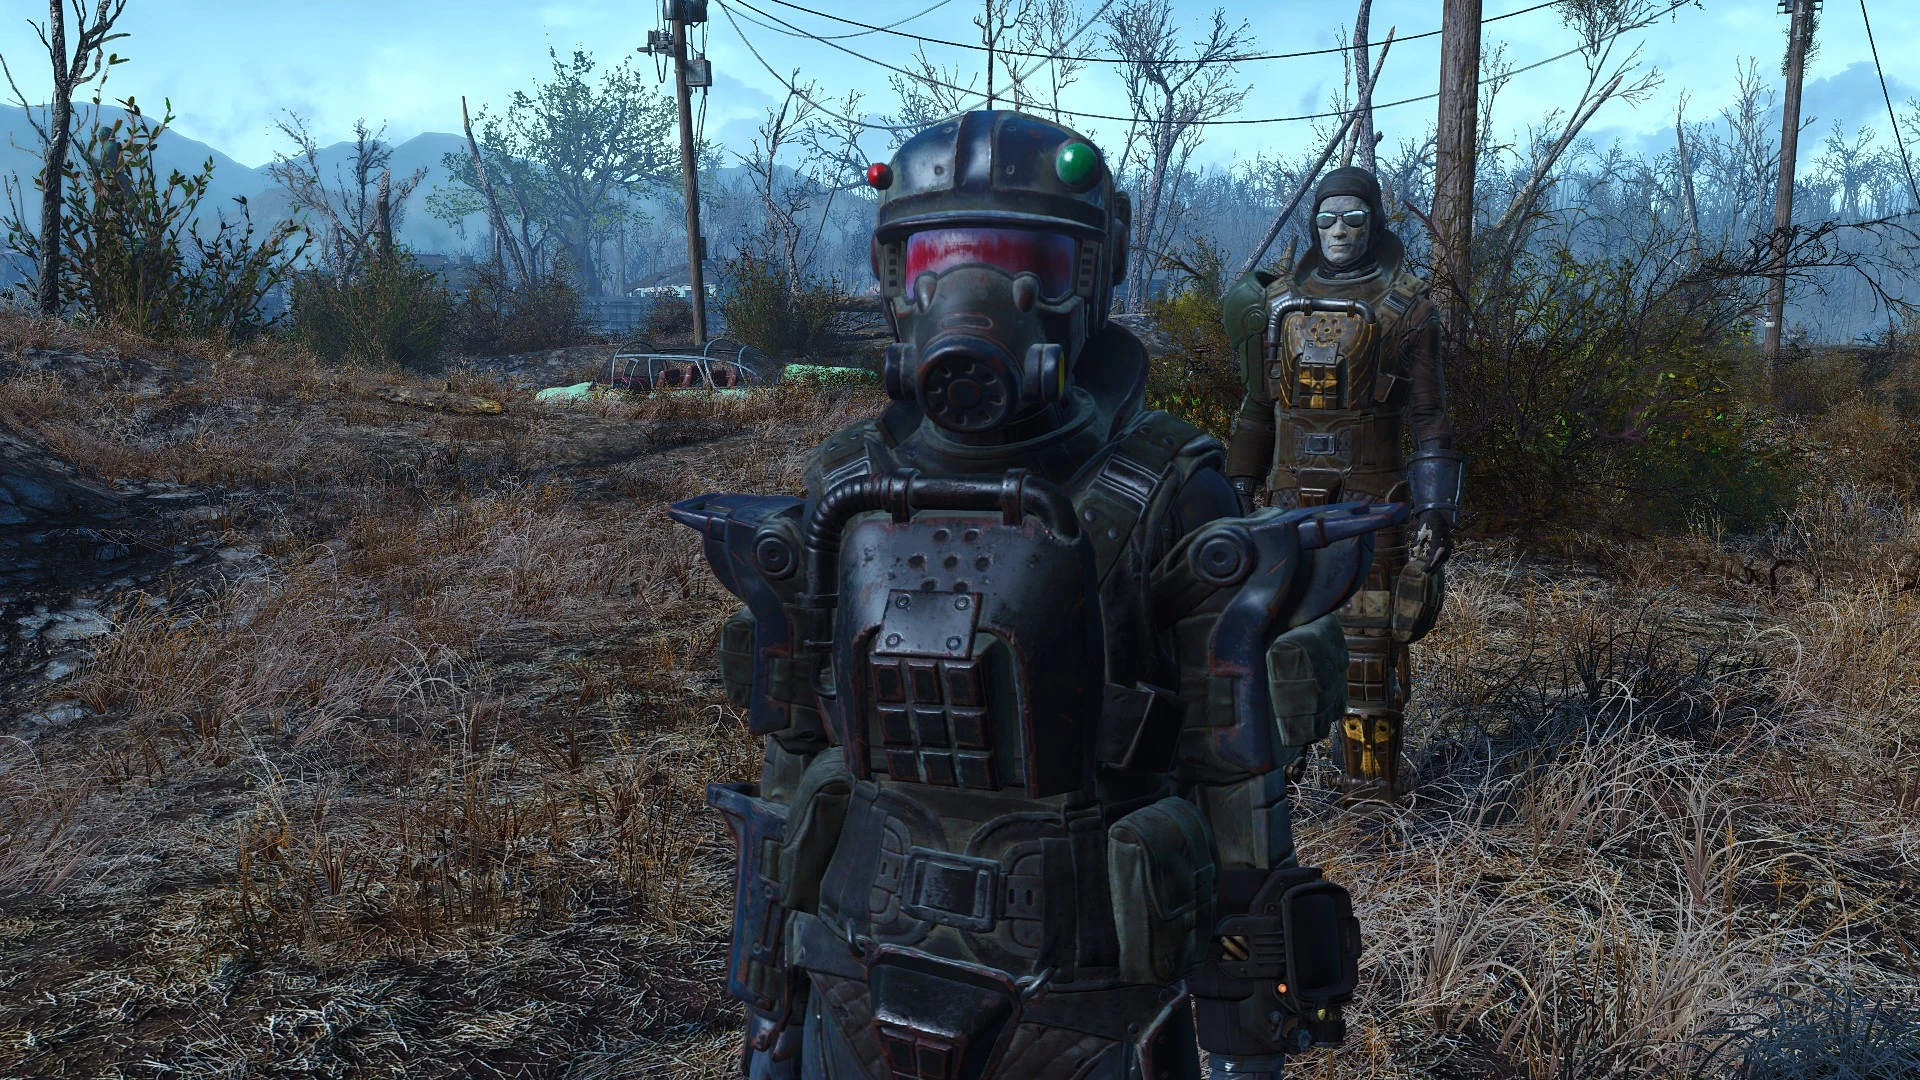 Gallery of Heavy Marine Armor Fallout 4.